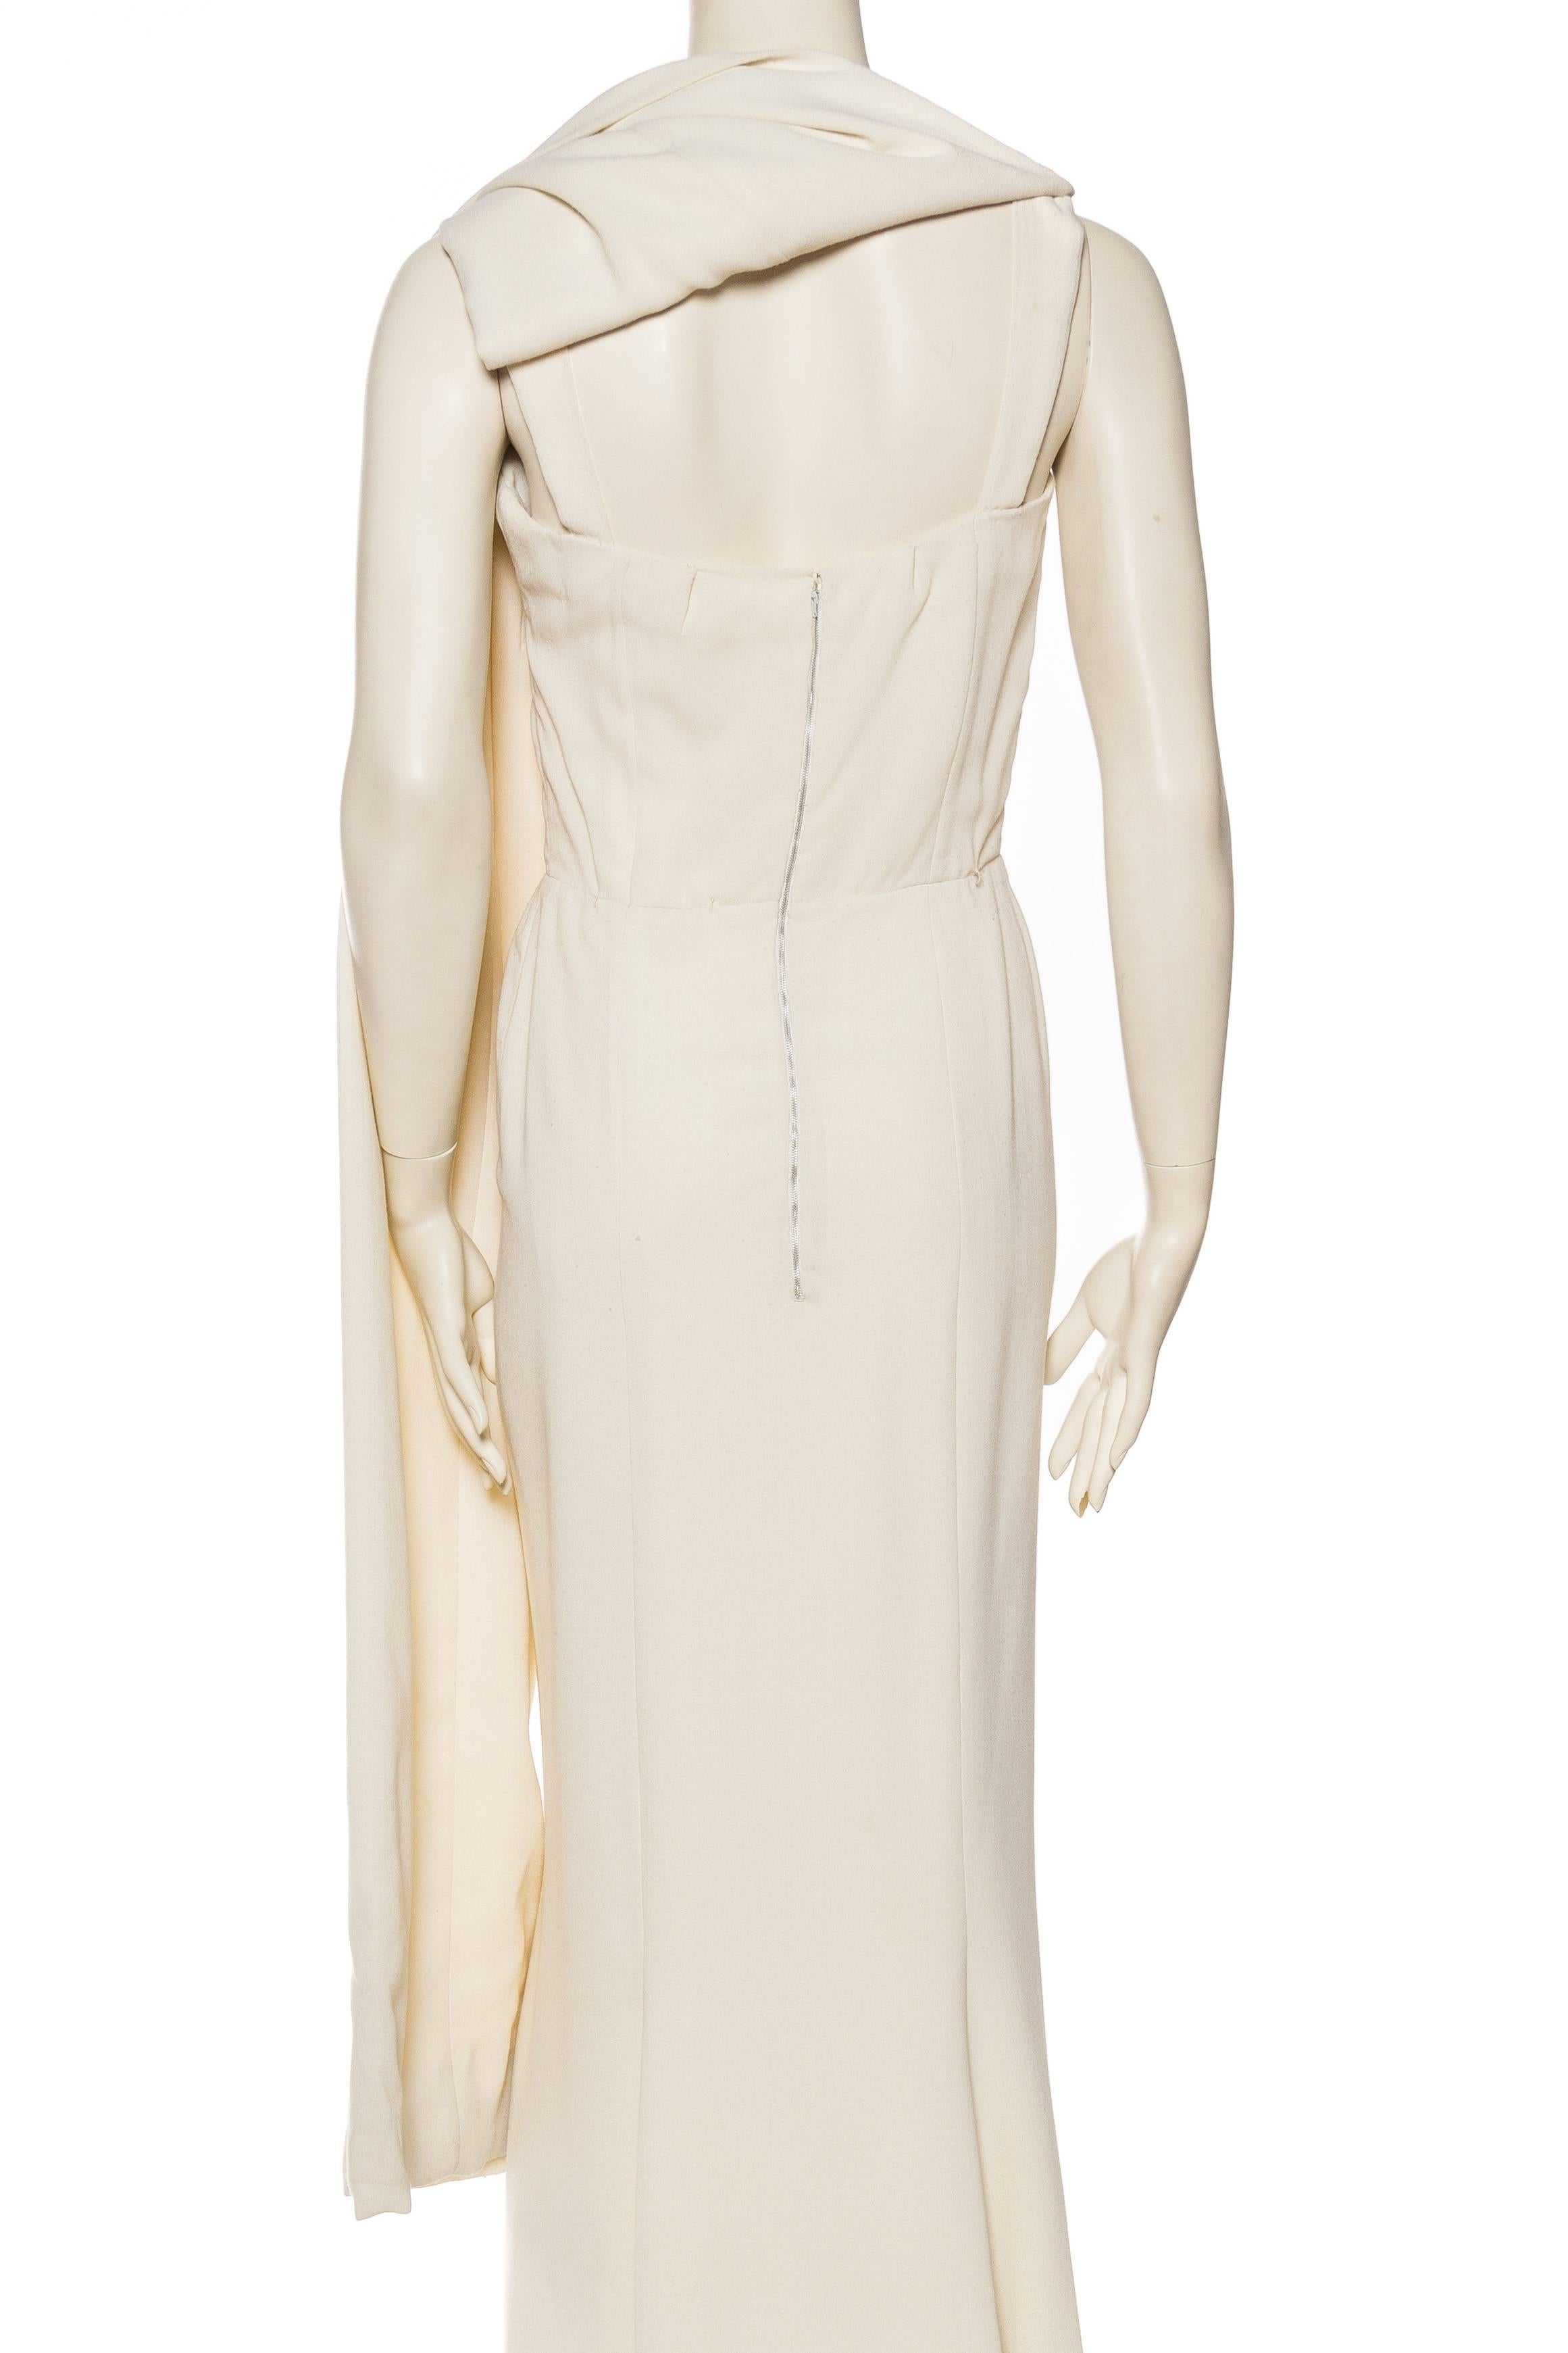 Women's 1960S PIERRE BALMAIN Off White Rayon & Silk Crepe Modernist Gown With Draped Ba For Sale